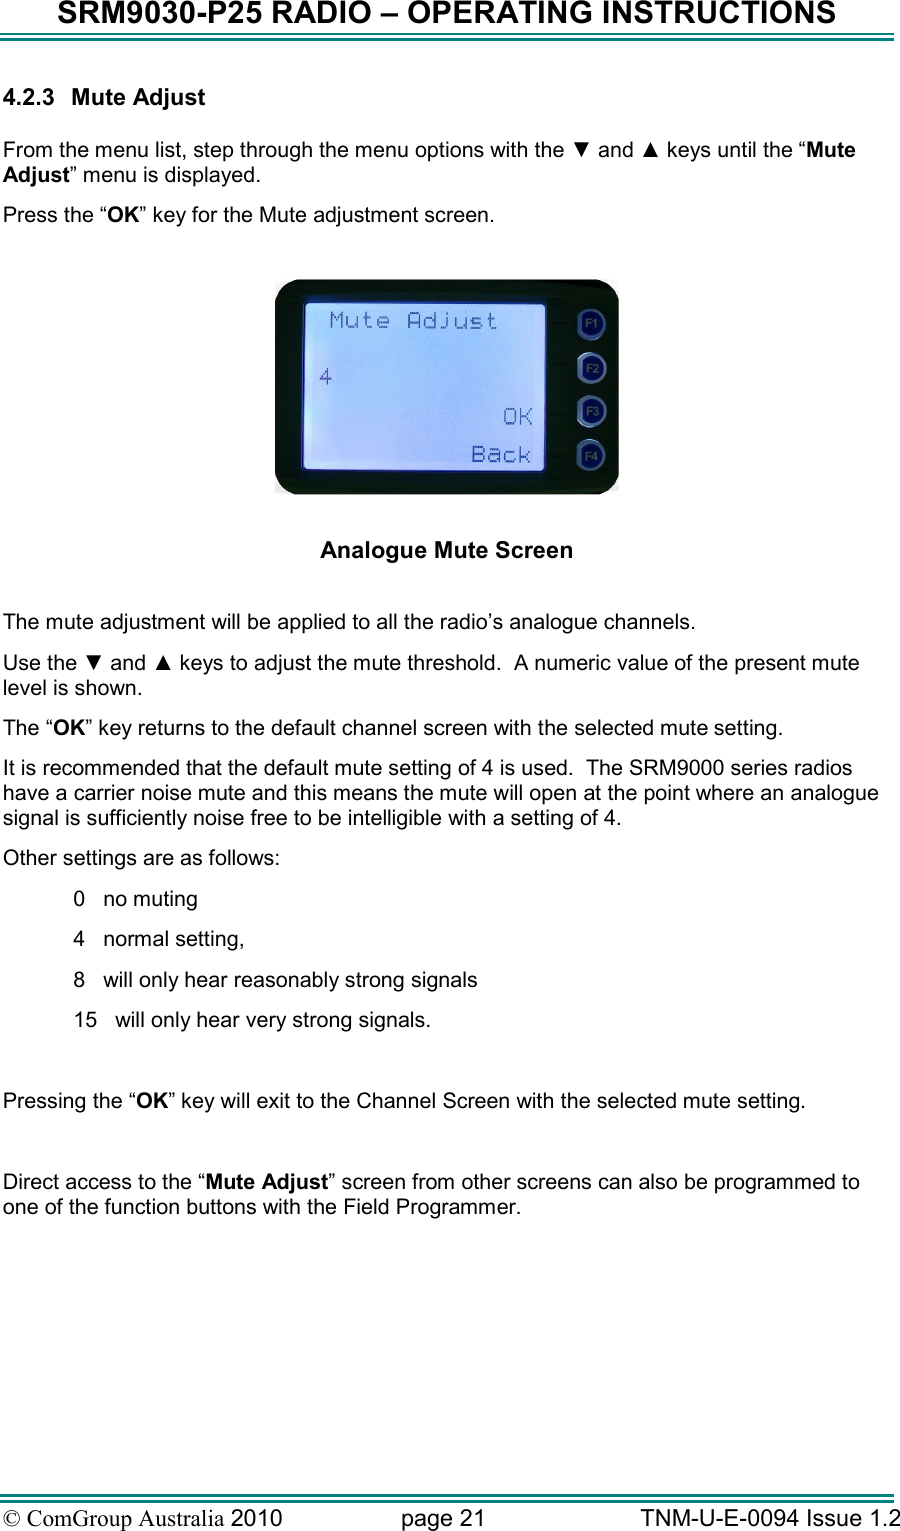 SRM9030-P25 RADIO – OPERATING INSTRUCTIONS © ComGroup Australia 2010  page 21   TNM-U-E-0094 Issue 1.2 4.2.3  Mute Adjust  From the menu list, step through the menu options with the ▼ and ▲ keys until the “Mute Adjust” menu is displayed. Press the “OK” key for the Mute adjustment screen.    Analogue Mute Screen  The mute adjustment will be applied to all the radio’s analogue channels. Use the ▼ and ▲ keys to adjust the mute threshold.  A numeric value of the present mute level is shown. The “OK” key returns to the default channel screen with the selected mute setting. It is recommended that the default mute setting of 4 is used.  The SRM9000 series radios have a carrier noise mute and this means the mute will open at the point where an analogue signal is sufficiently noise free to be intelligible with a setting of 4. Other settings are as follows: 0   no muting 4   normal setting, 8   will only hear reasonably strong signals  15   will only hear very strong signals.  Pressing the “OK” key will exit to the Channel Screen with the selected mute setting.  Direct access to the “Mute Adjust” screen from other screens can also be programmed to one of the function buttons with the Field Programmer. 